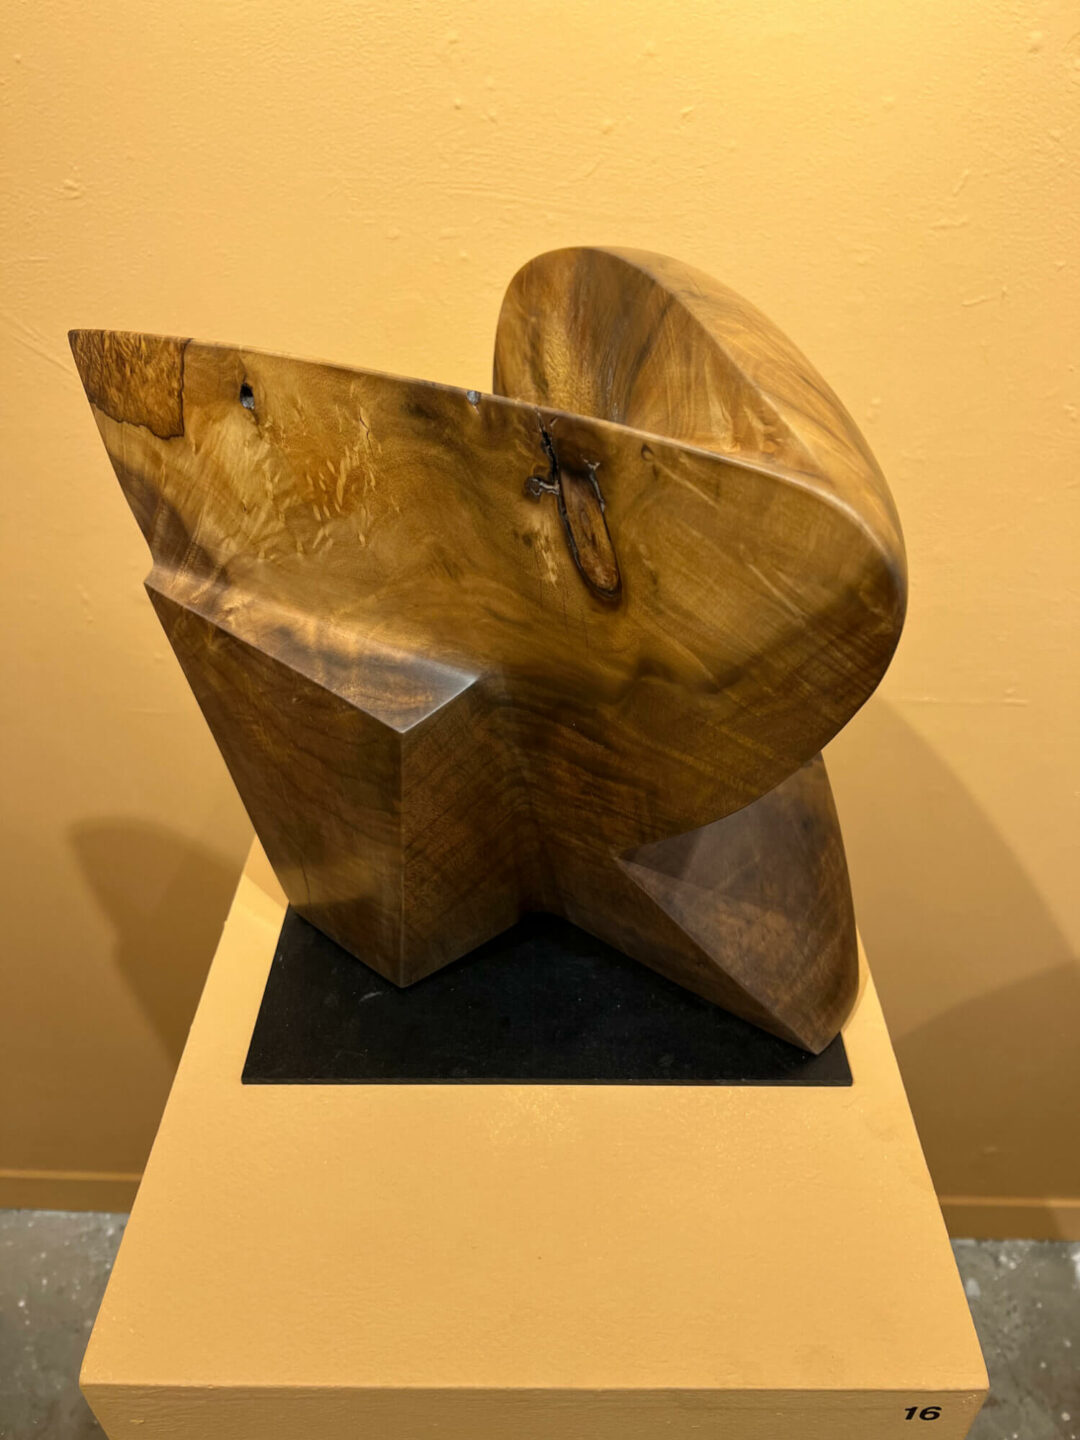 Bruce Mitchell - CURVACEOUS ANGULARITY #2 - 2018 - Bay laurel burl